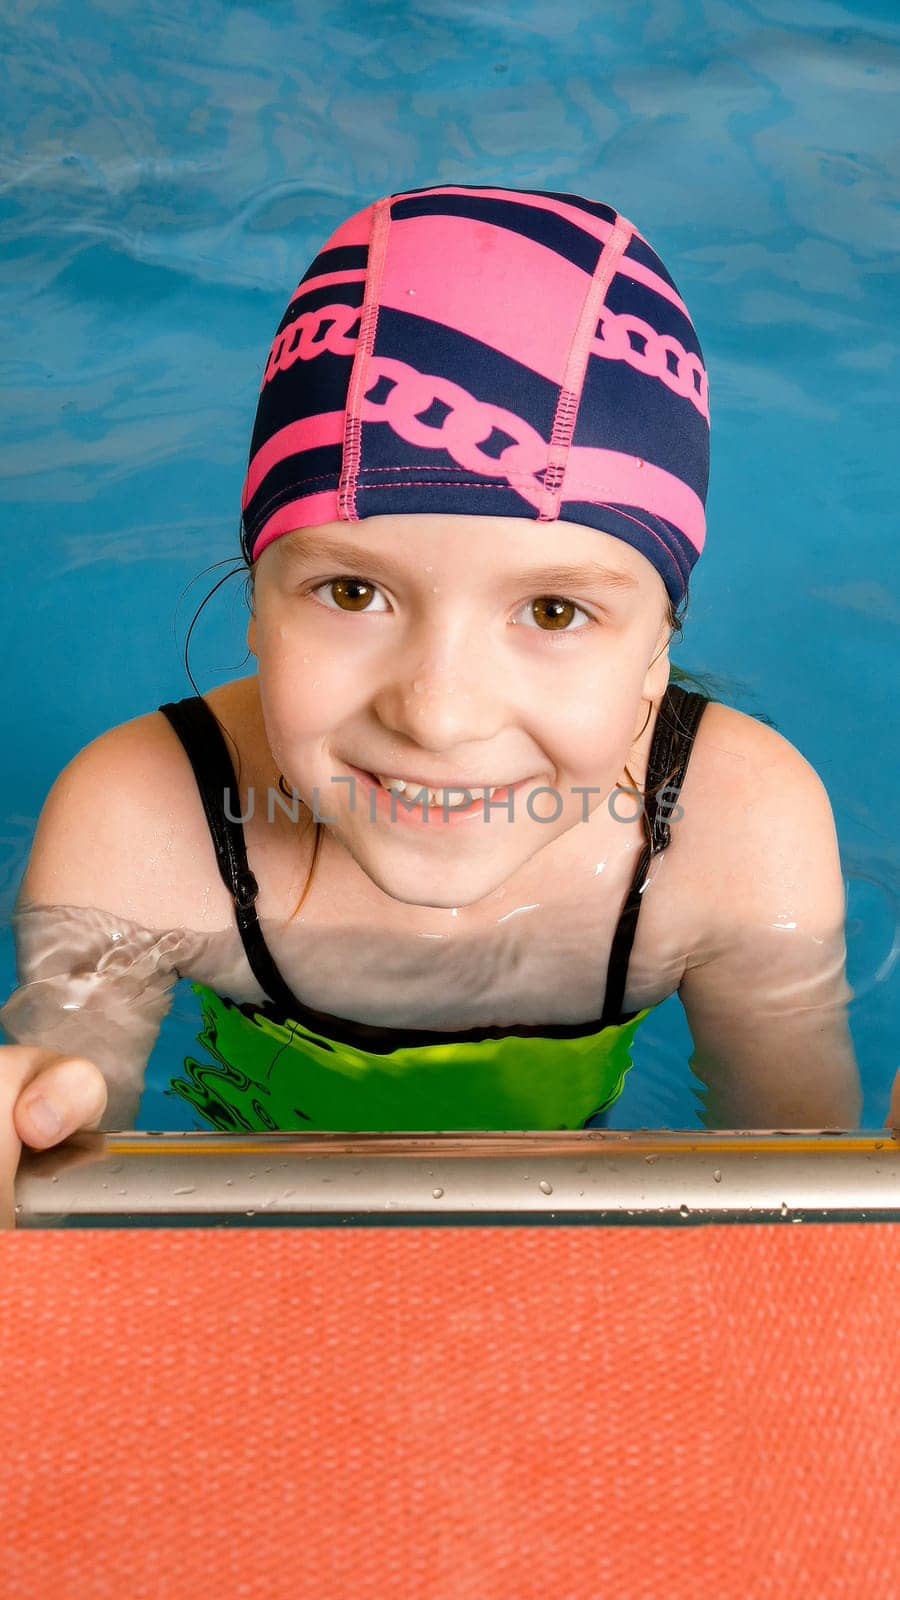 Portrait of a little girl in indoor swimming pool by Mariakray